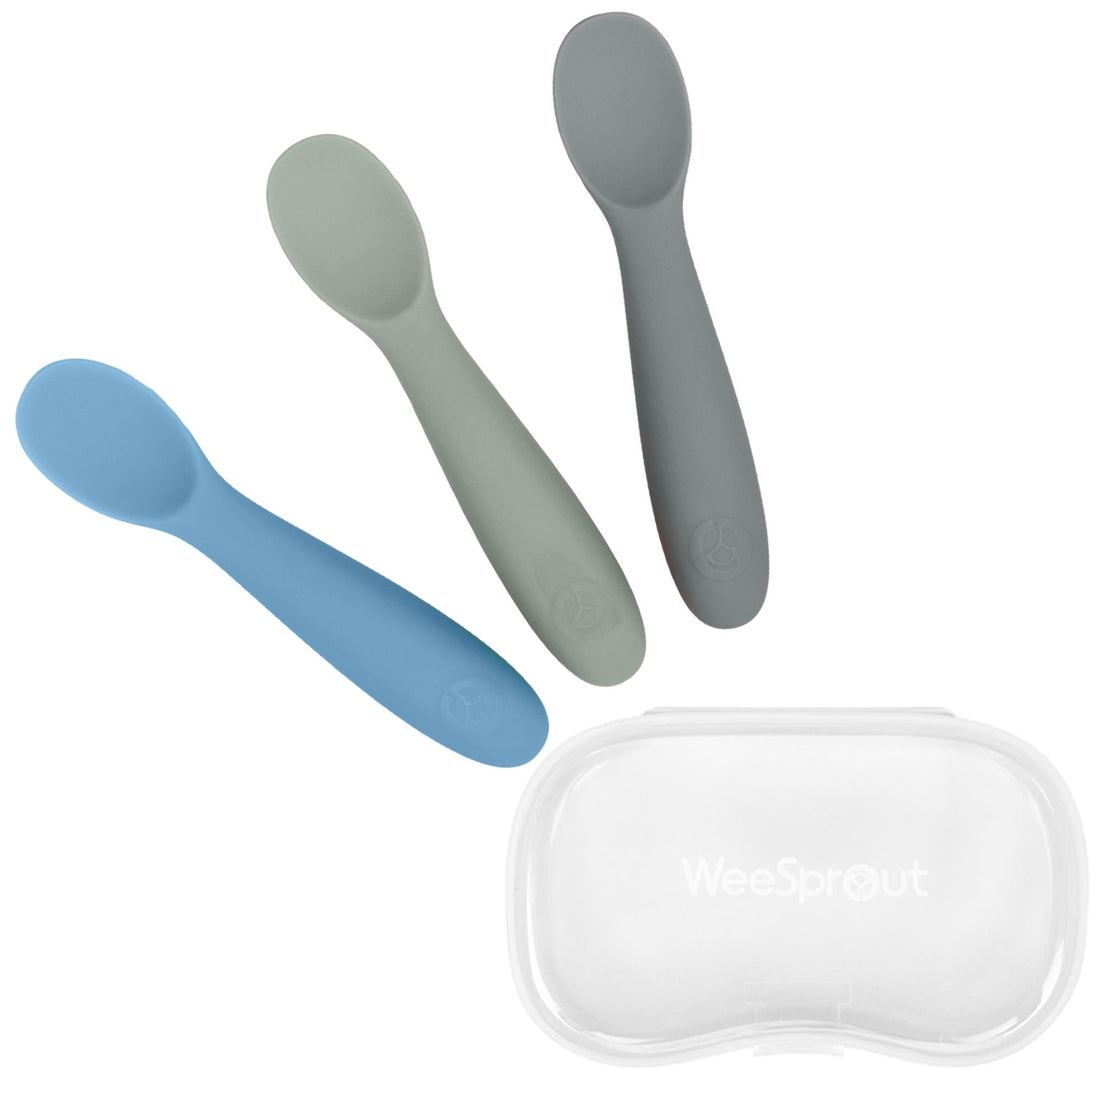 Baby Led Weaning Silicone Baby Spoons for Self Feeding